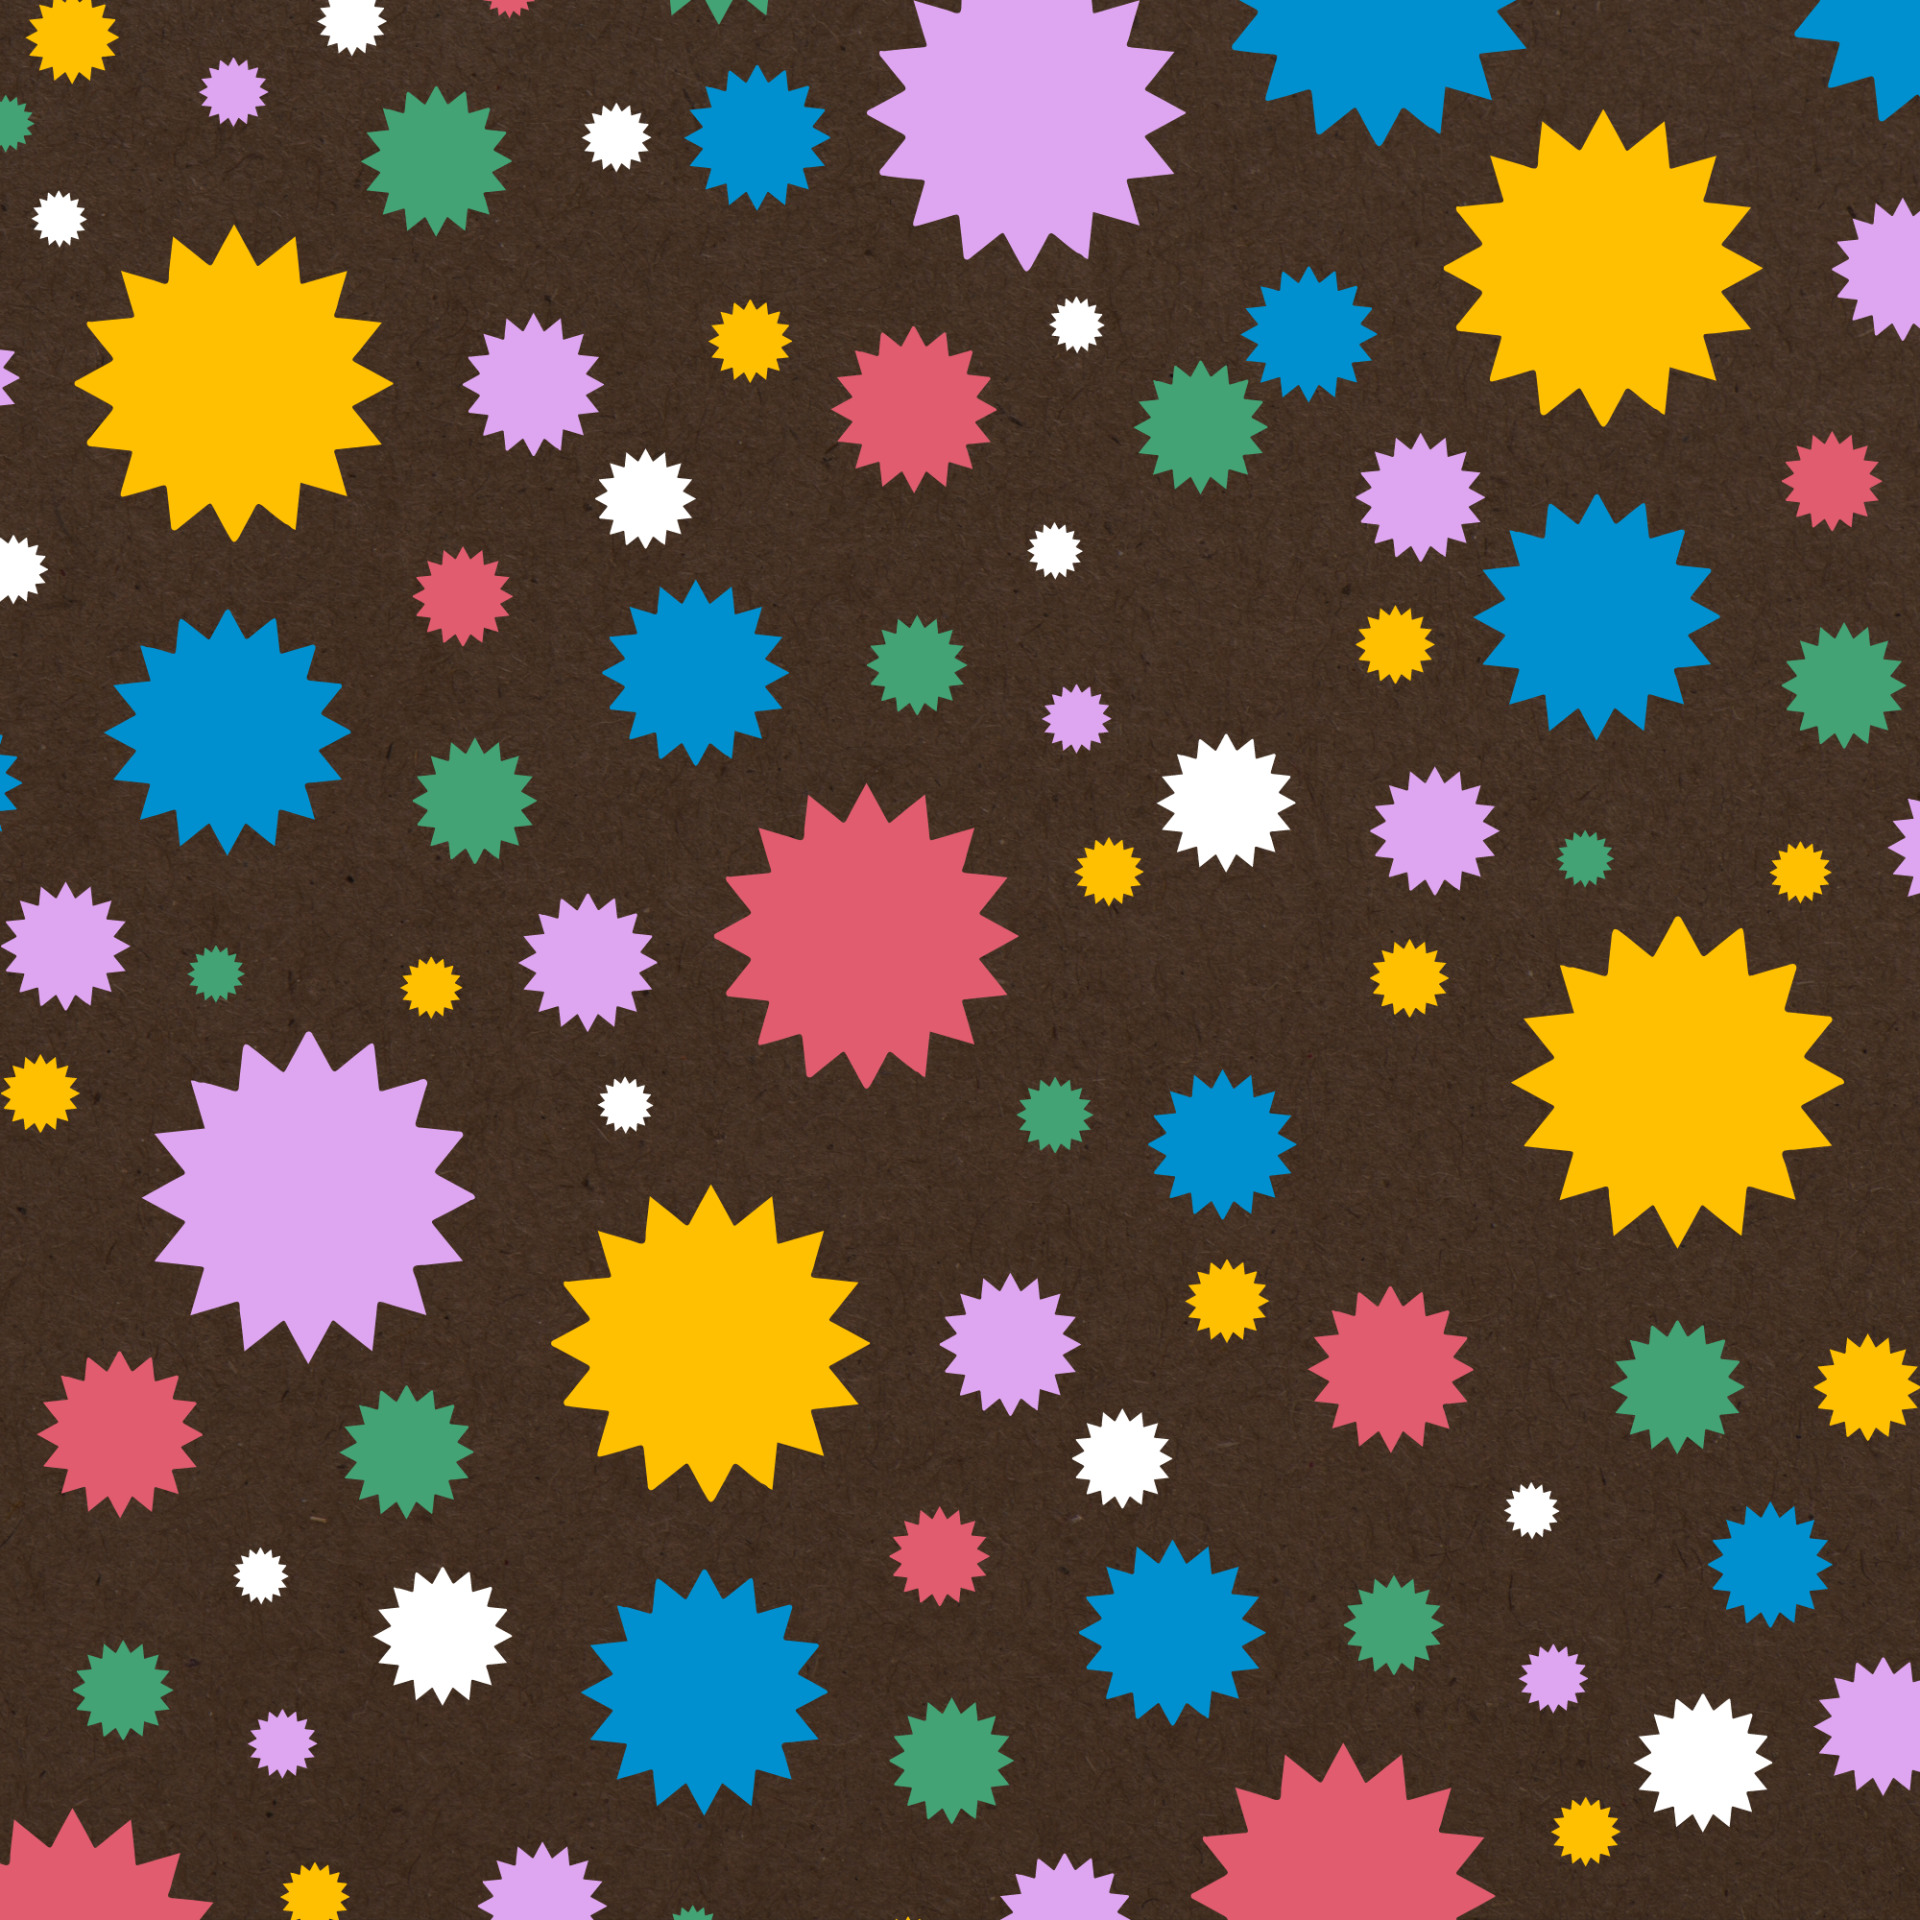 an image with a brown background filled with colorful red, green, blue, yellow, and white starburst shapes of varying sizes.